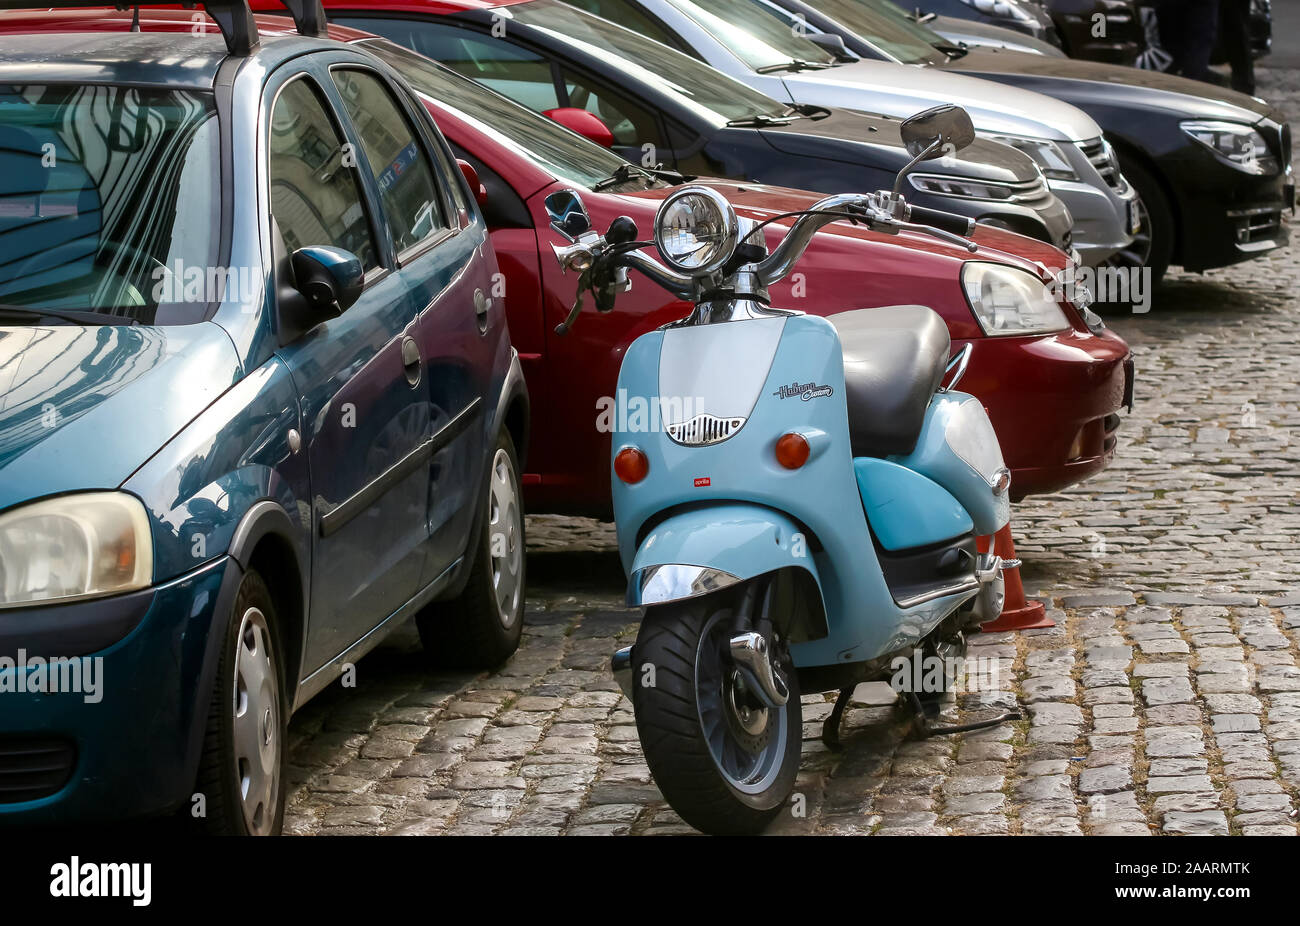 Bucharest, Romania - November 07, 2019: An Aprilia Habana Custom scooter is seen in front of several cars parked on a street in Bucharest. Stock Photo